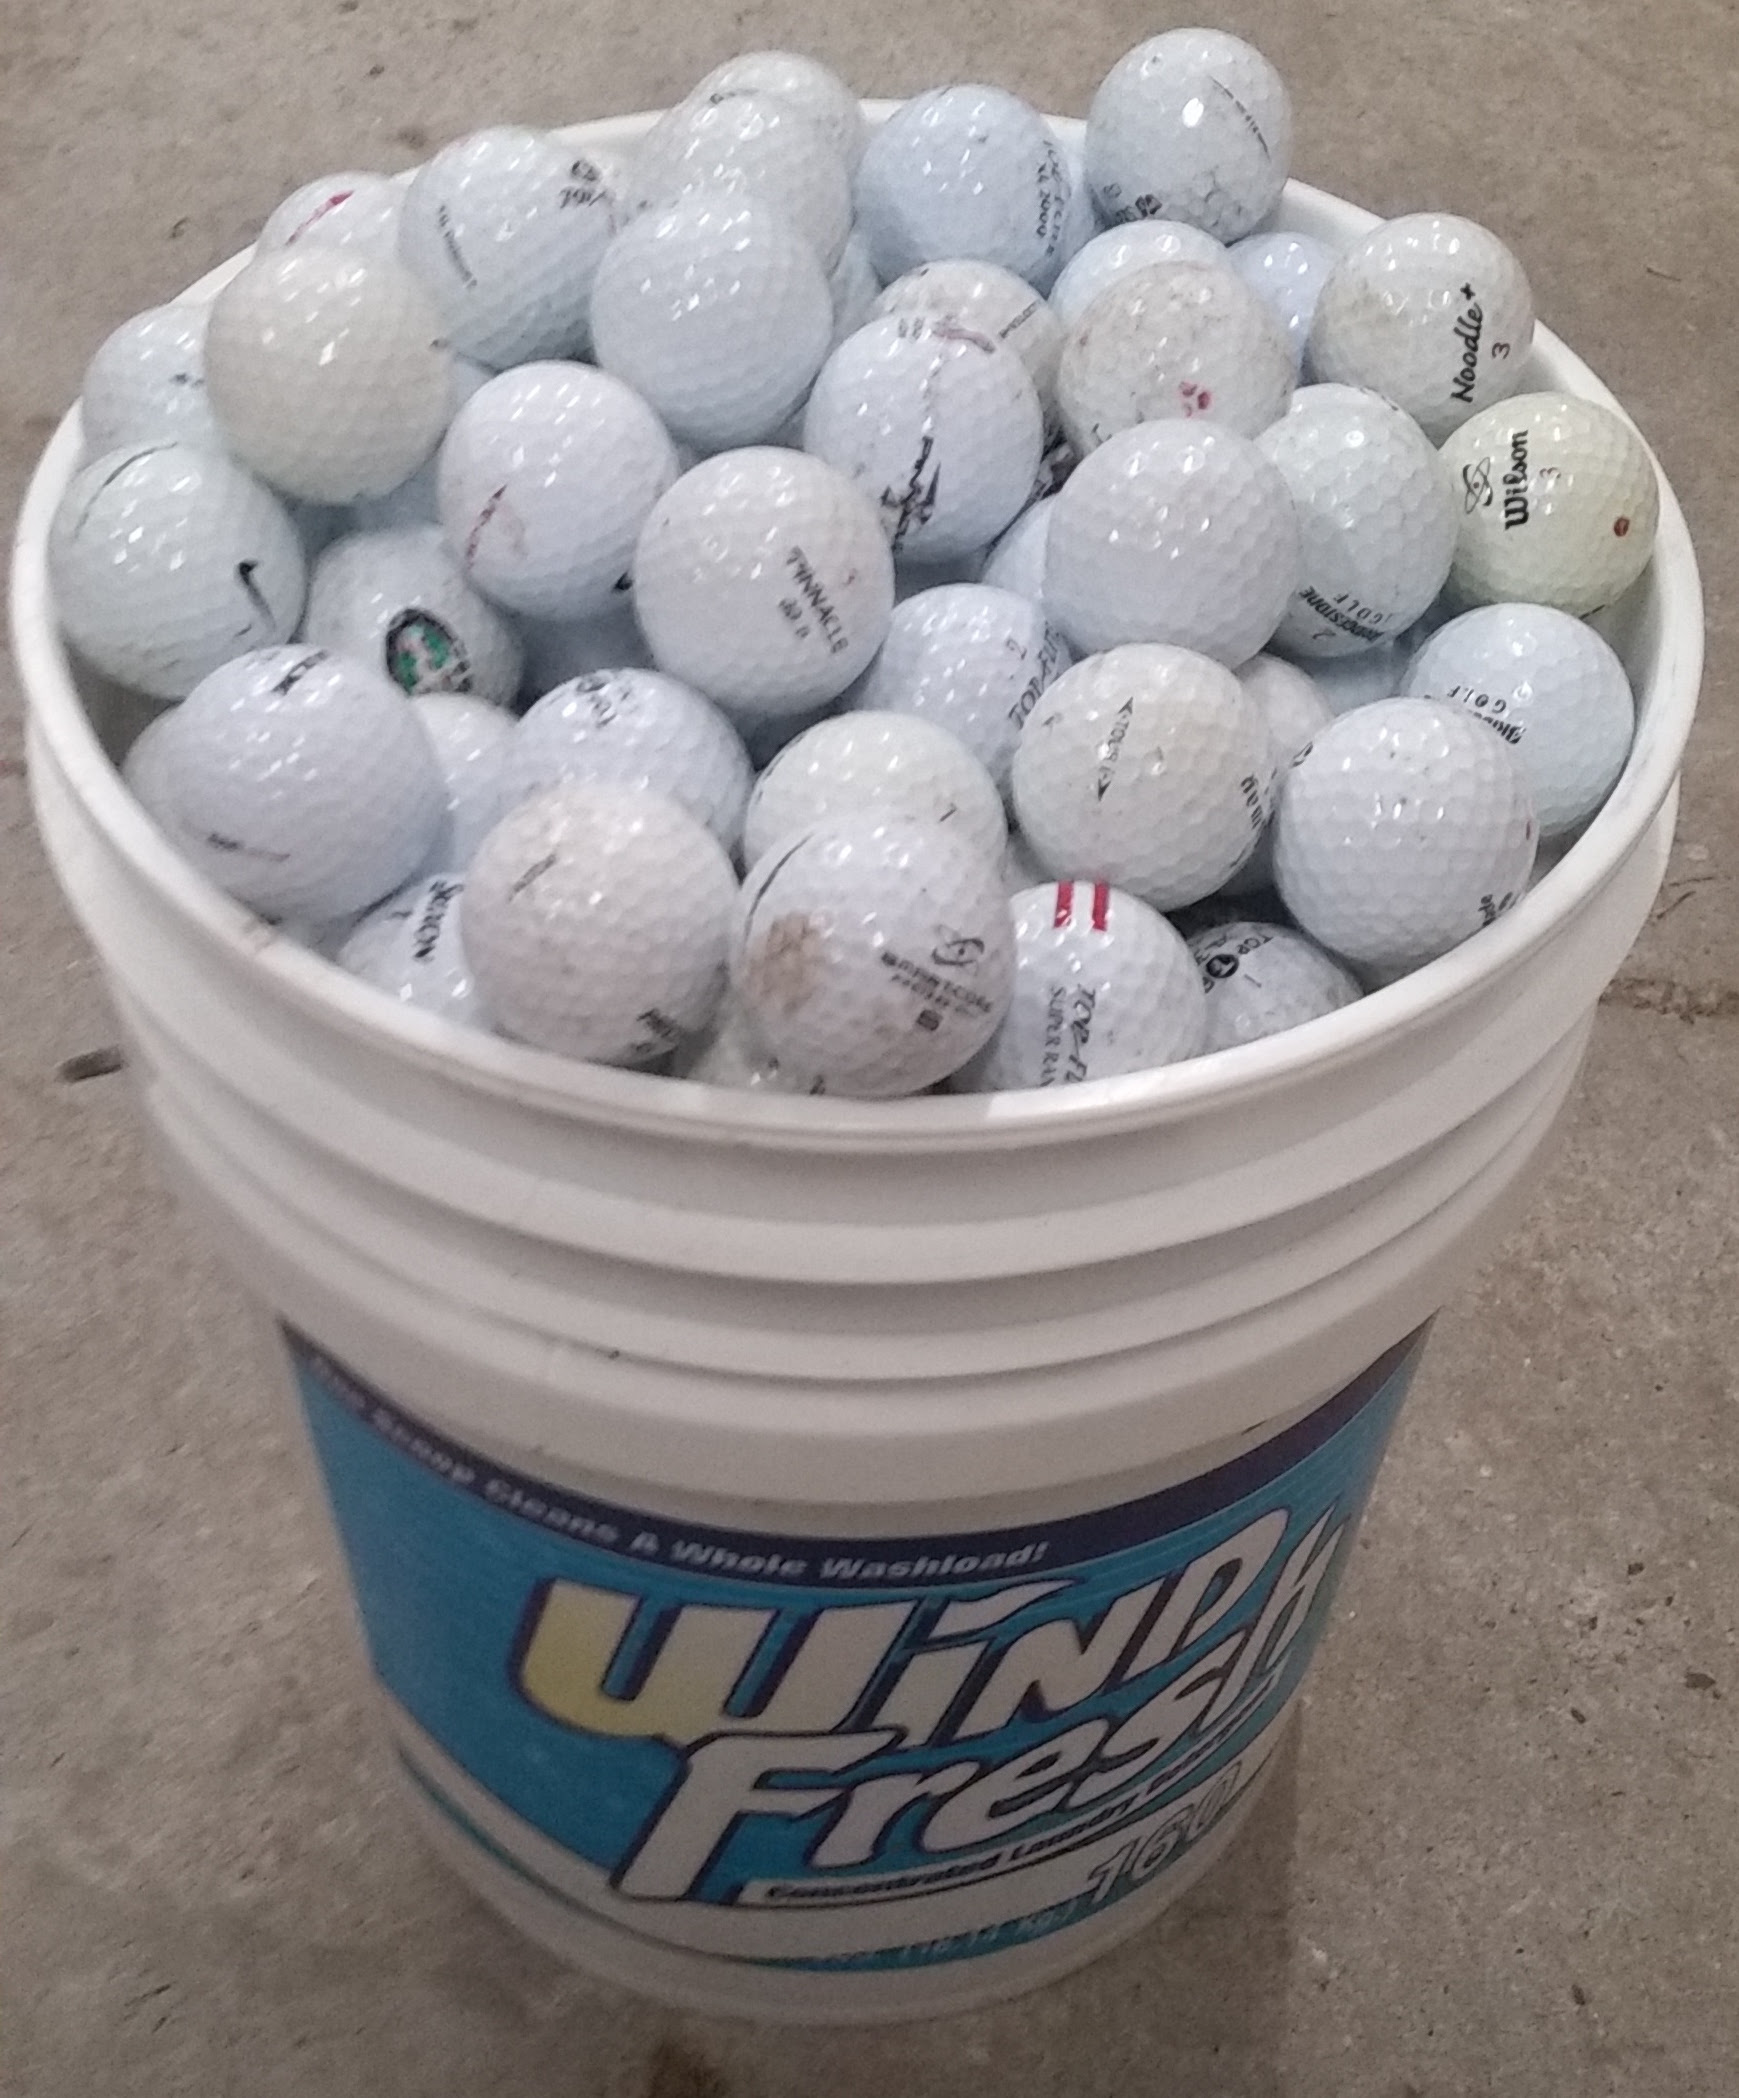 How Many Golf Balls Fit Into A 5 Gallon Bucket